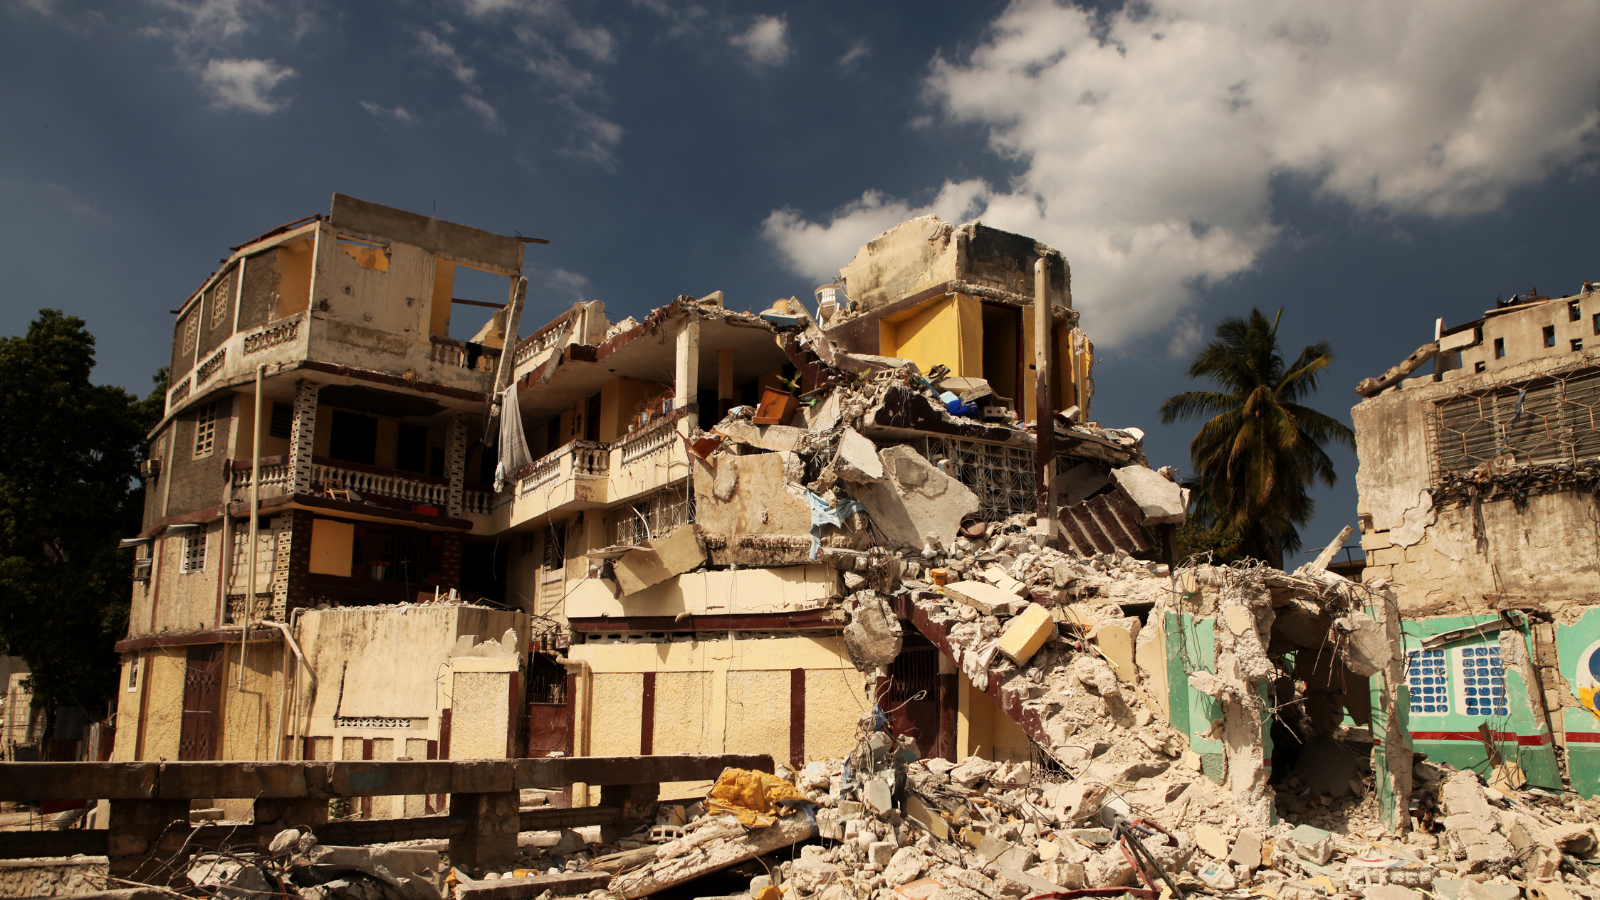 Destroyed building after earthquake in Haiti.